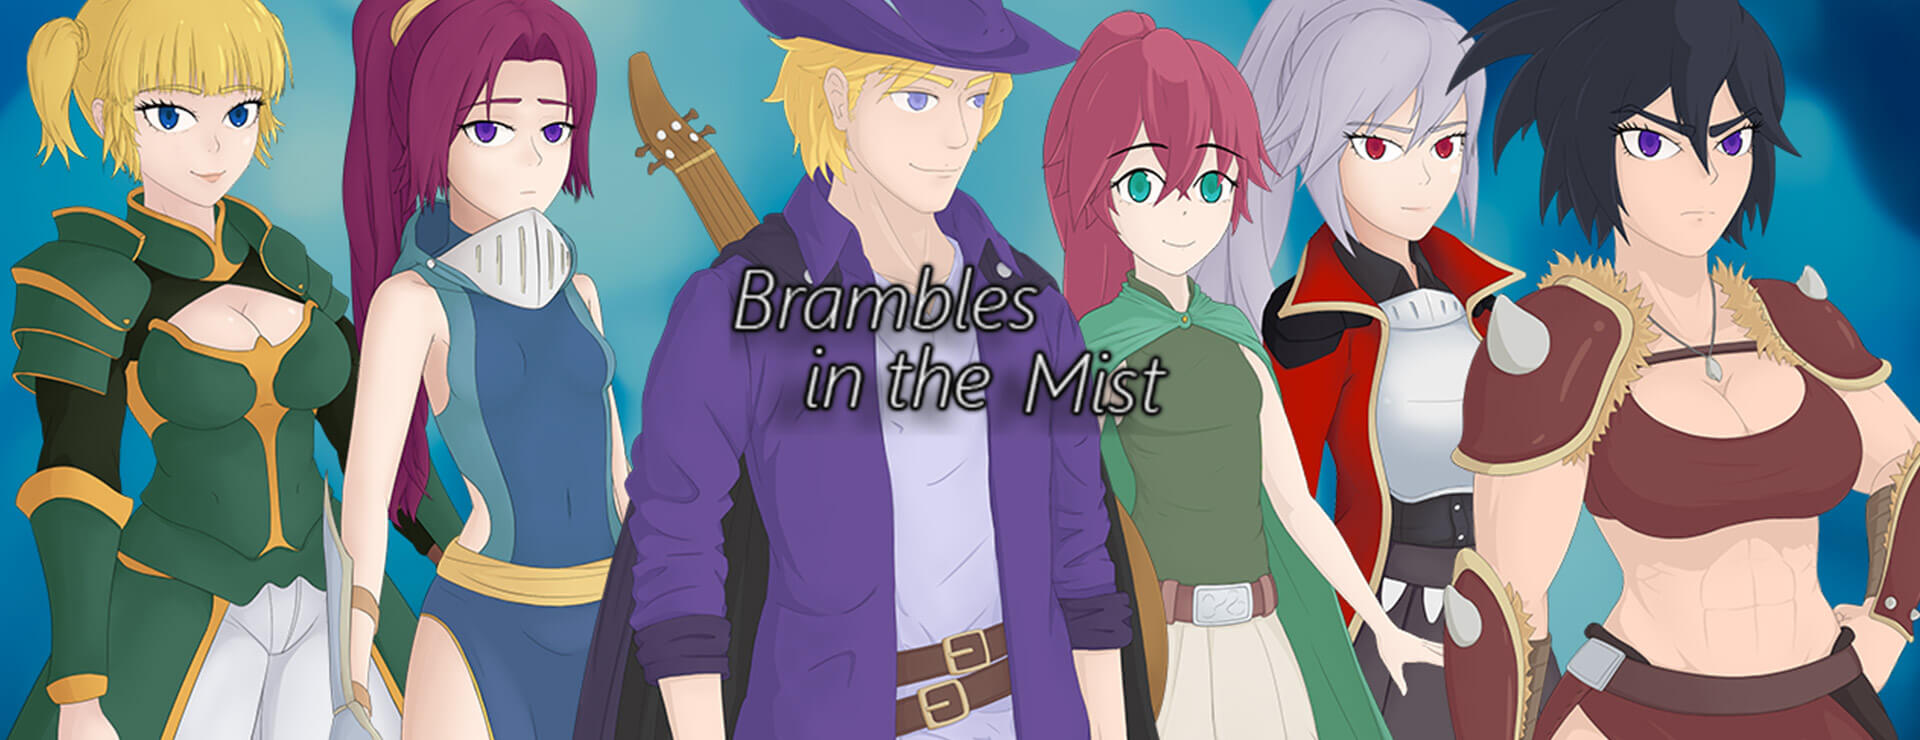 Brambles in the Mist - 角色扮演 遊戲